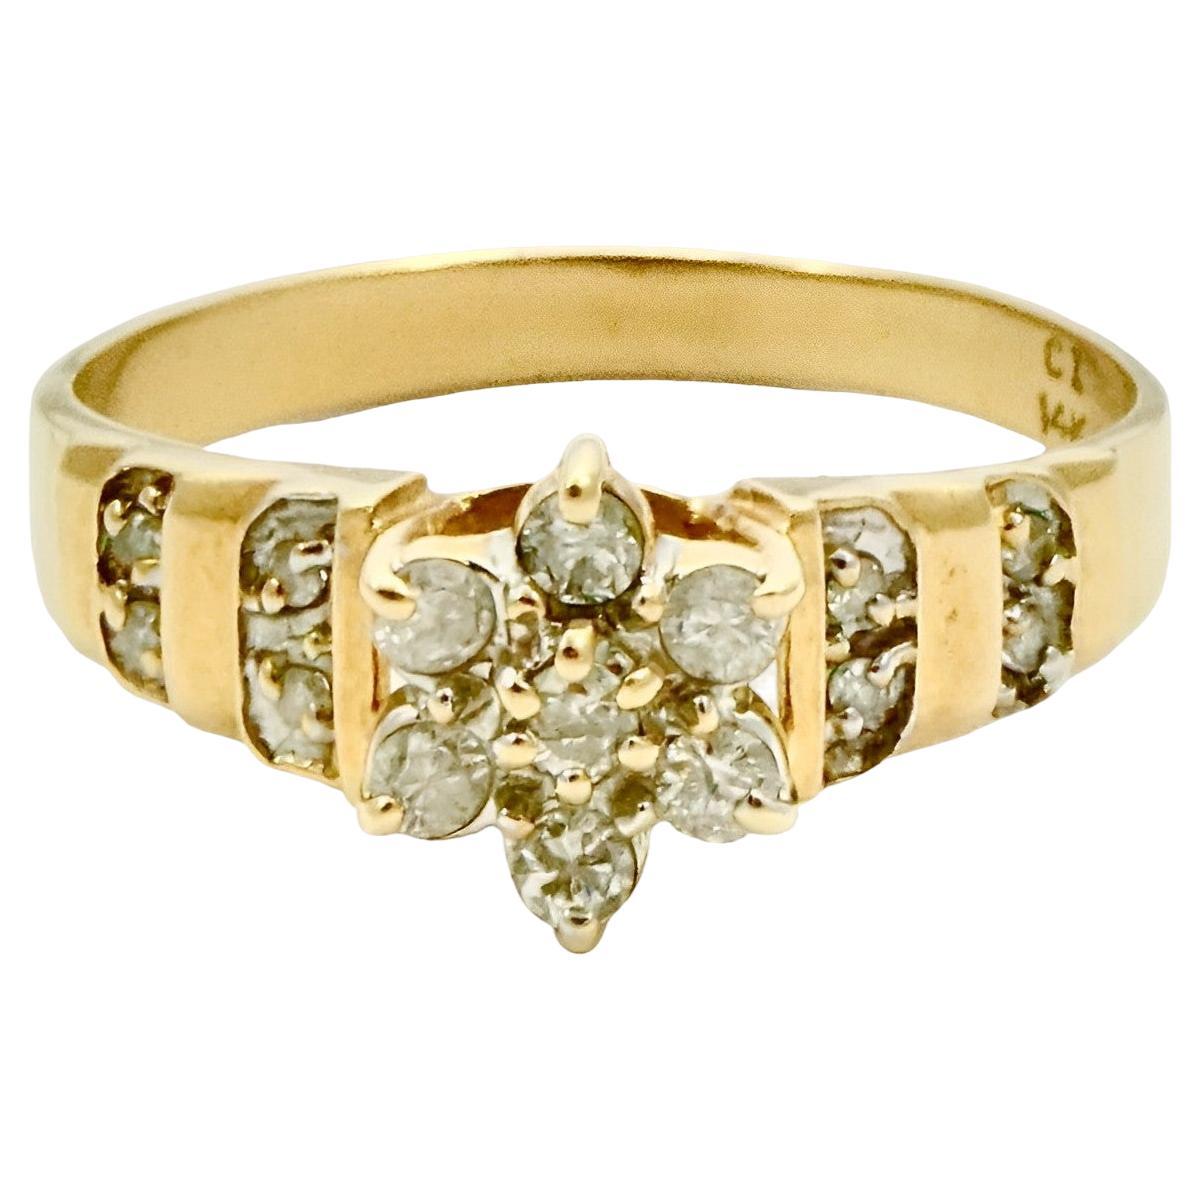 CI 14K Gold and Diamond Flower Cluster Ring with Diamond Accents circa 1960s